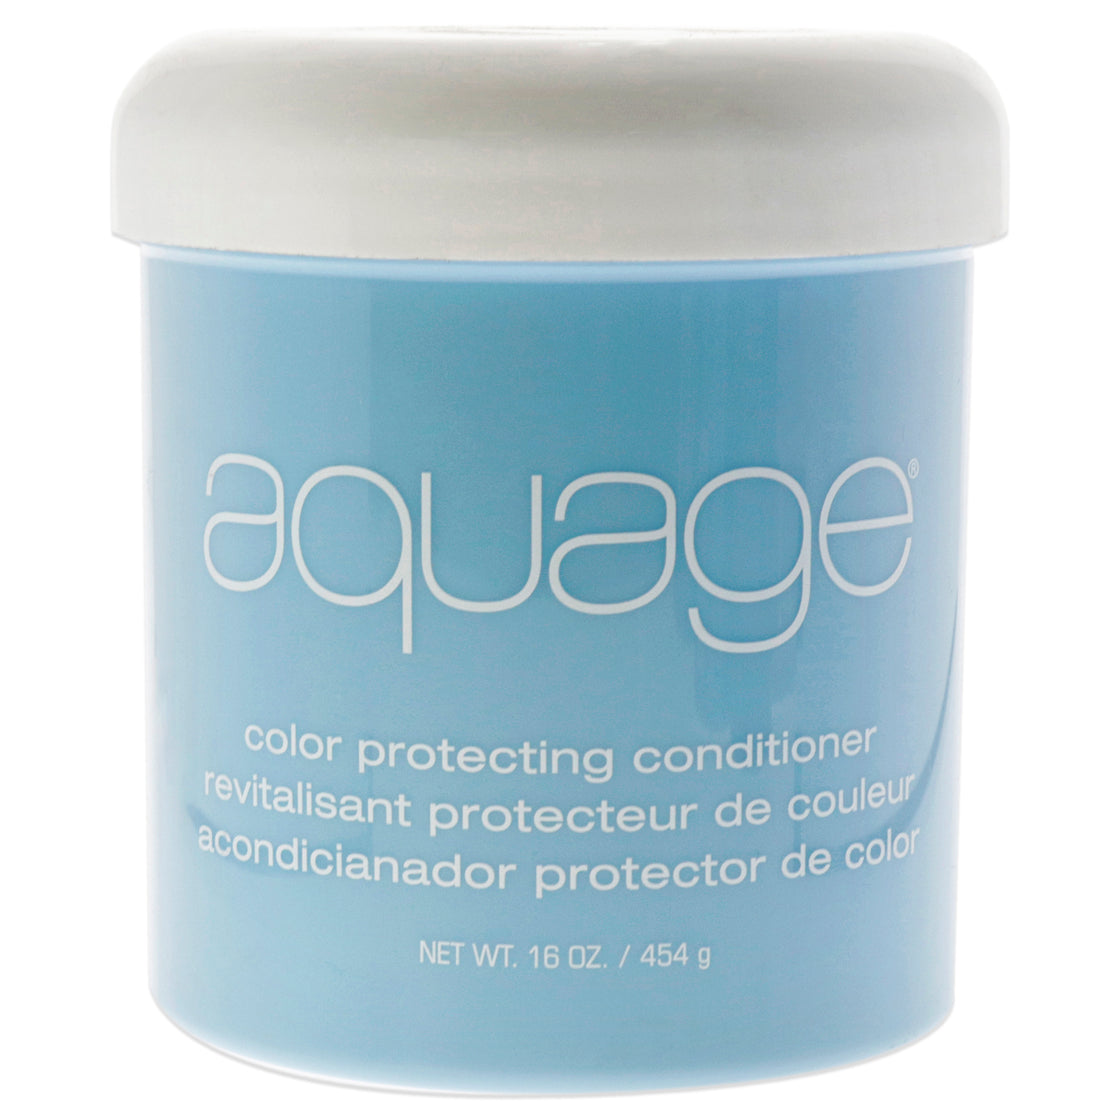 Color Protecting Conditioner by Aquage for Unisex - 16 oz Conditioner